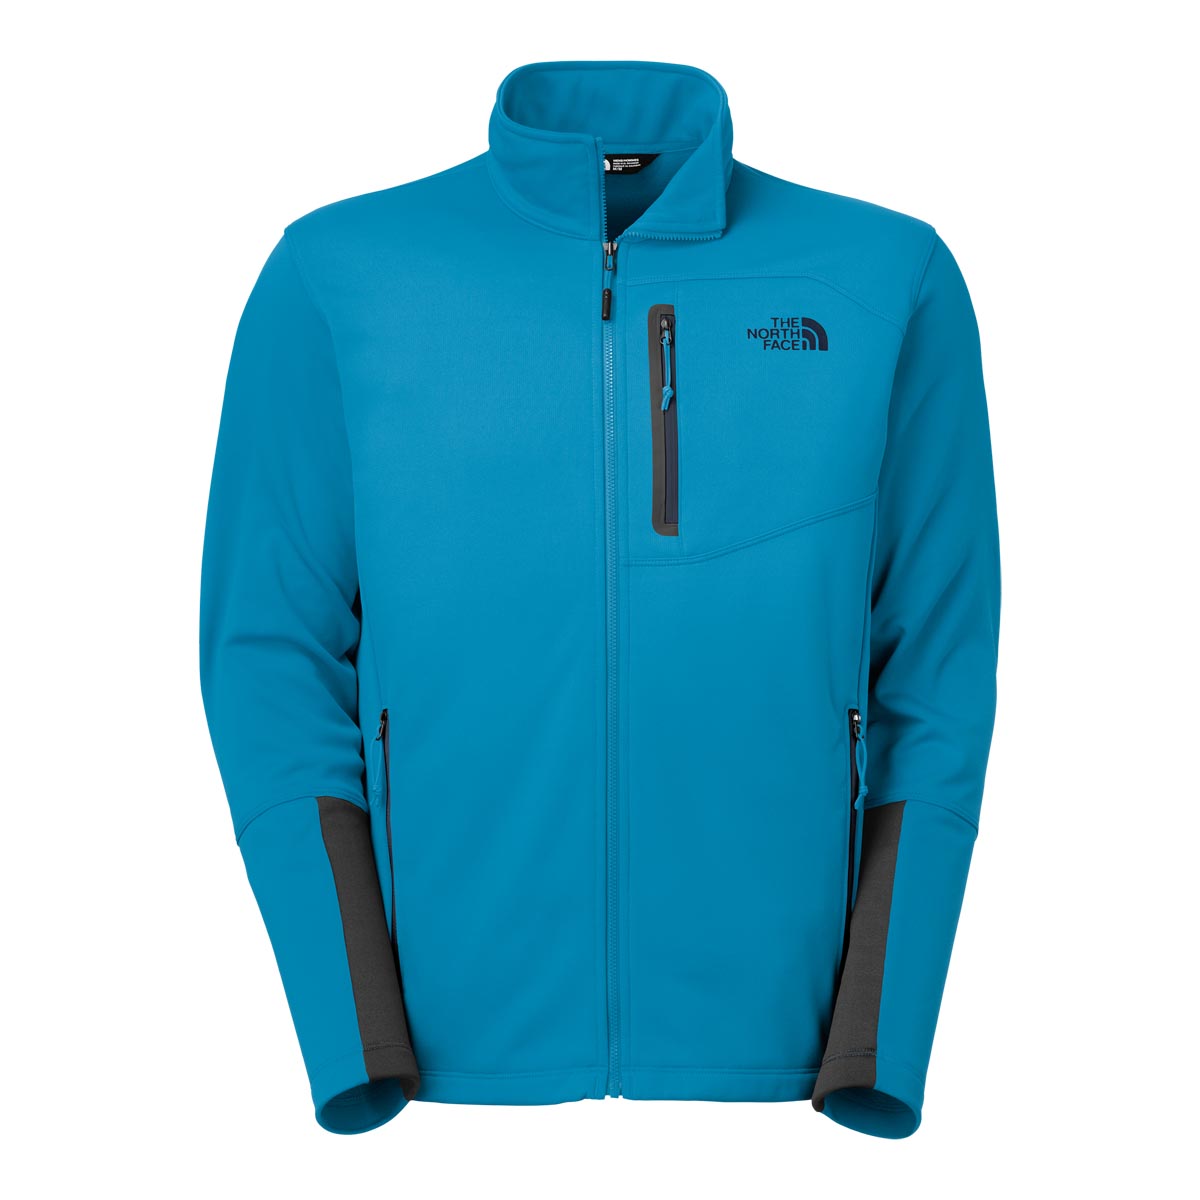 The North Face Men's Canyonlands Full Zip Discontinued Pricing